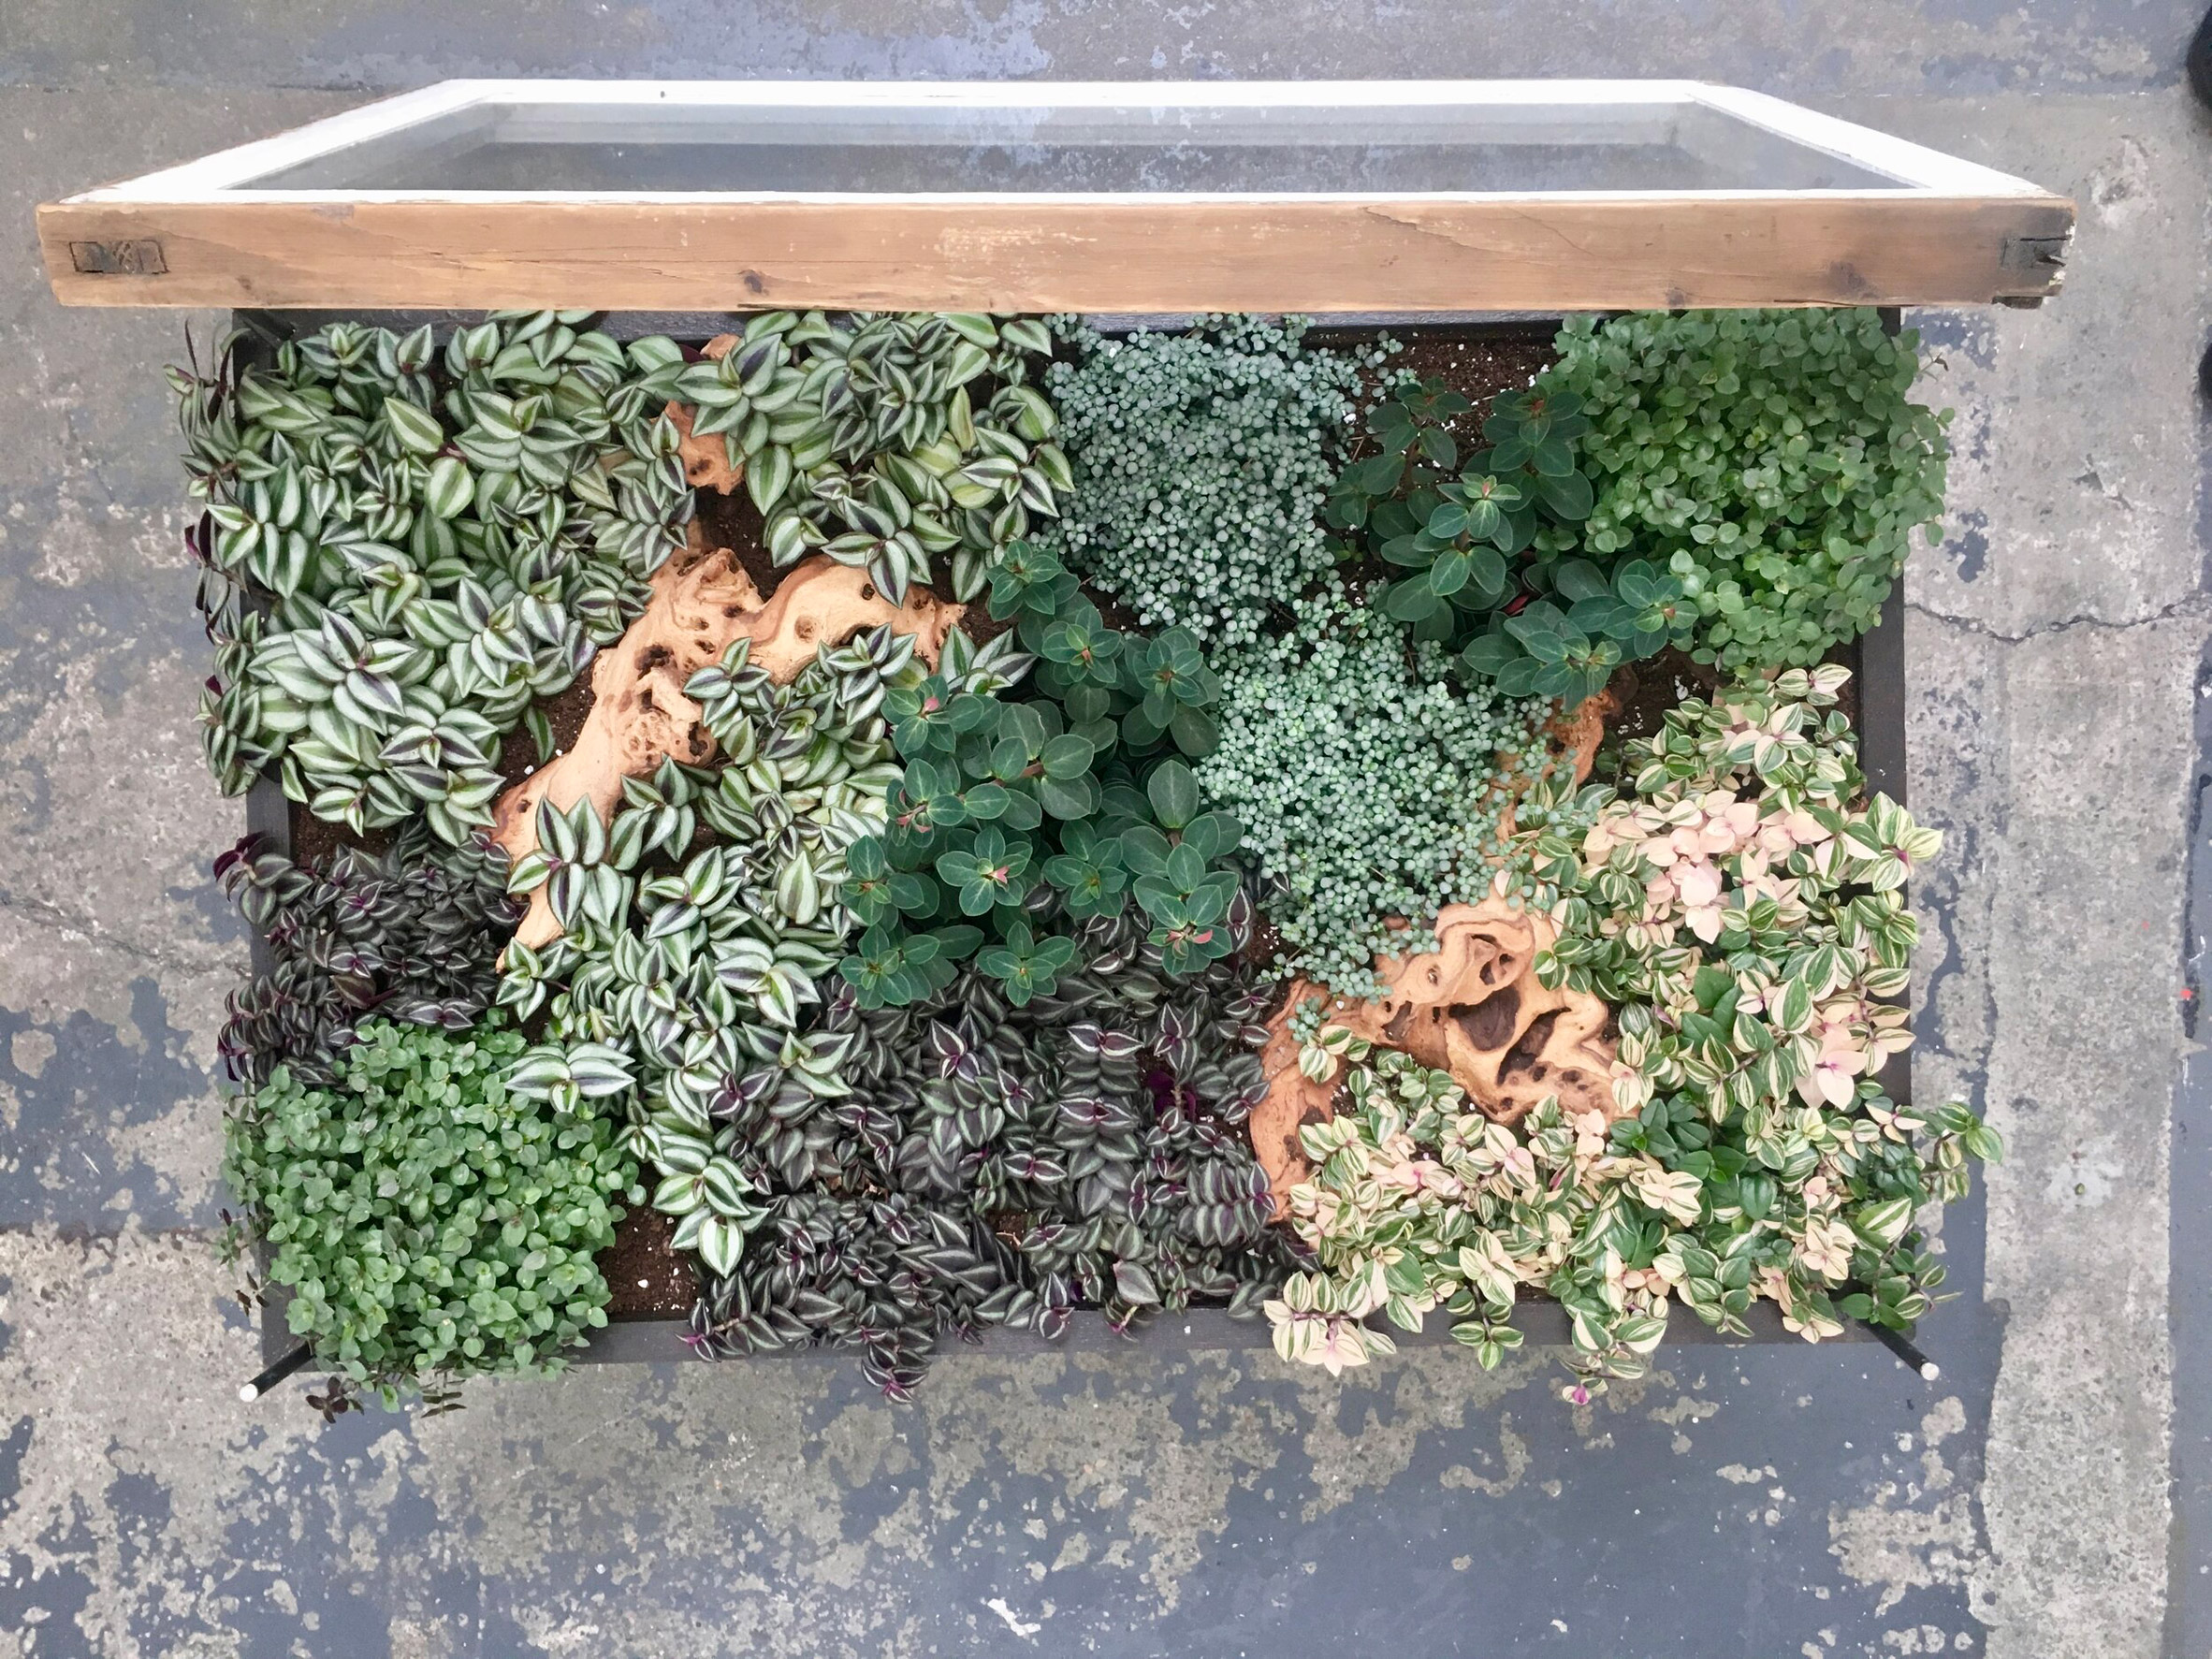 Hackney Botanical makes plant-filled tables from reclaimed window frames